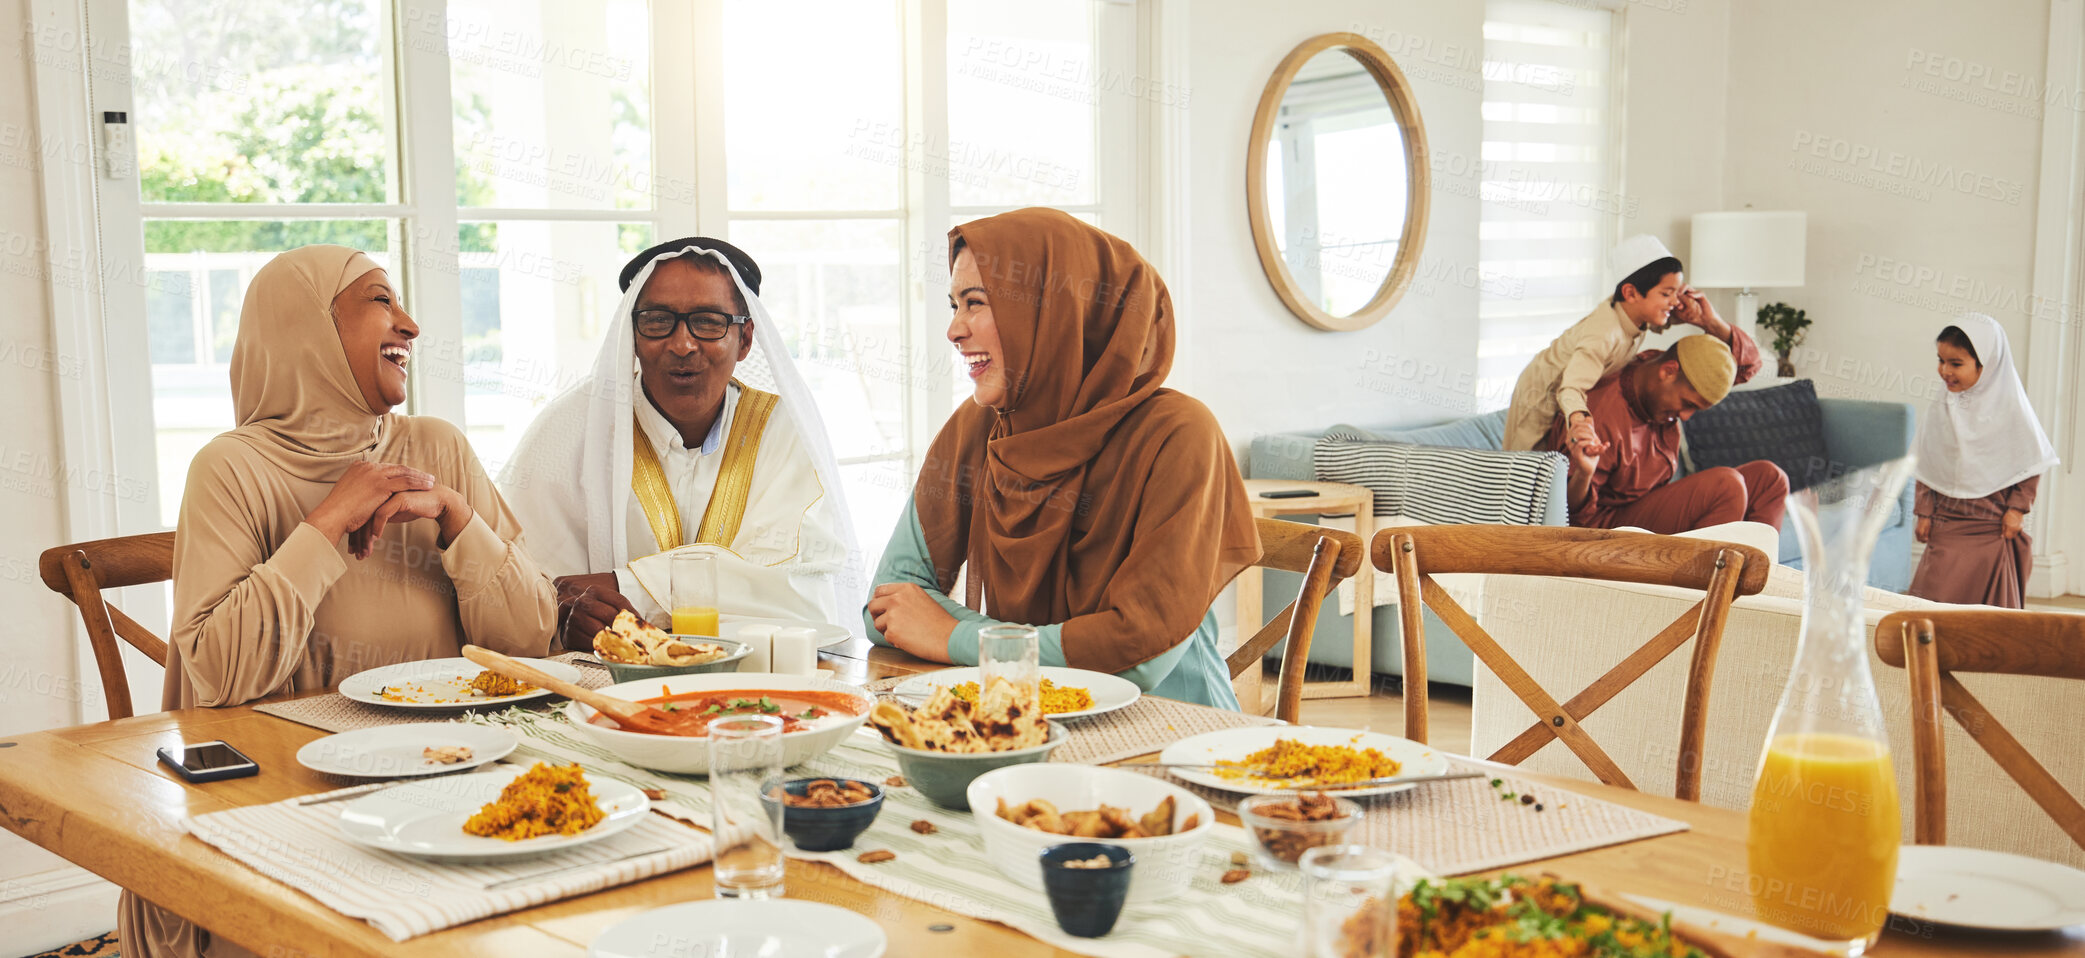 Buy stock photo Food, relax and muslim with big family at table for eid mubarak, Islamic celebration and lunch. Ramadan festival, culture and iftar with people eating at home for fasting, islam and religion holiday